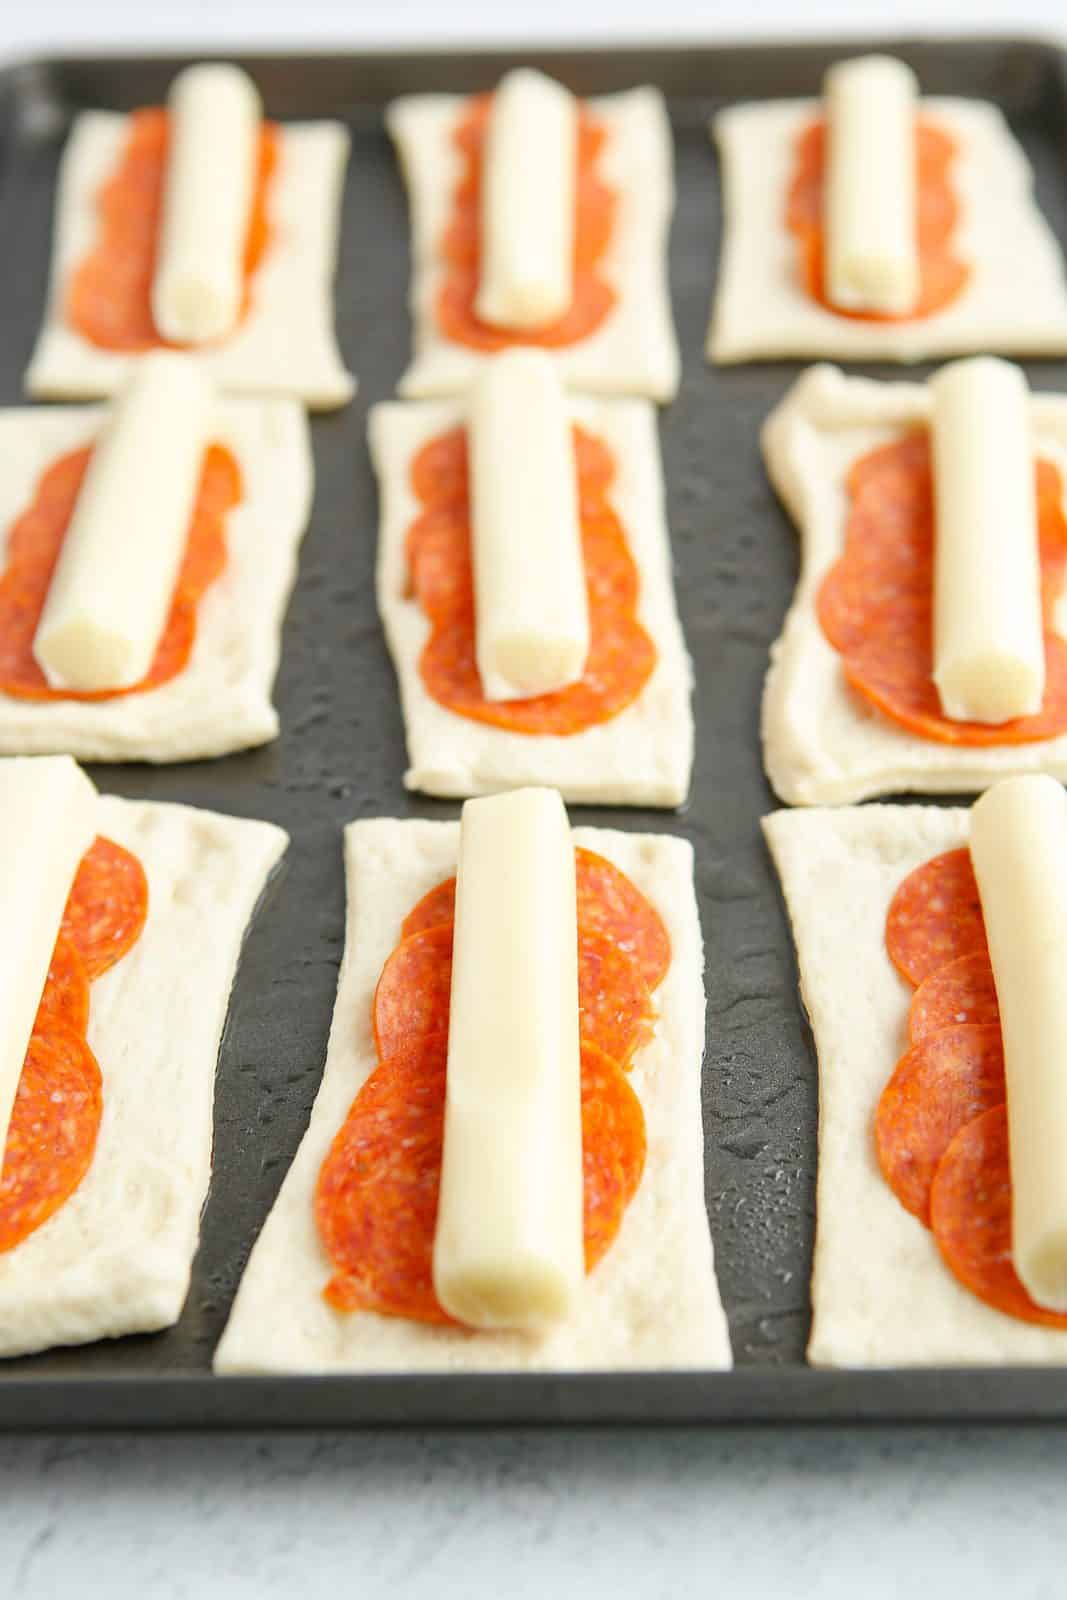 String cheese placed on top of pepperoni slices.